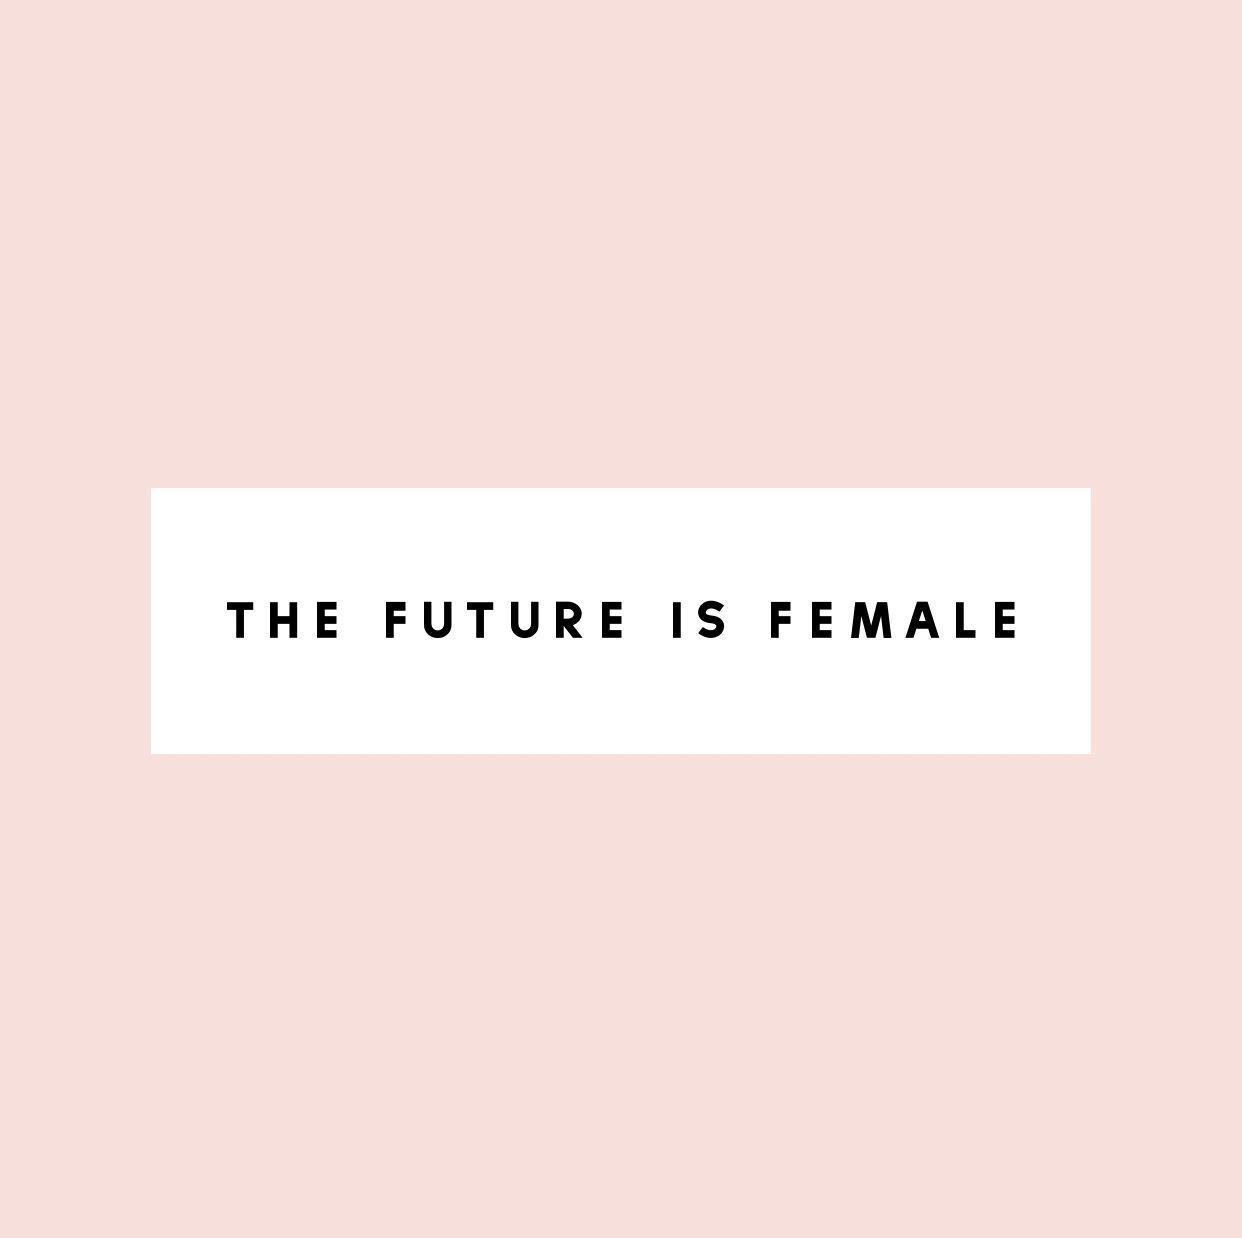 Yes that's right, the future IS female. Feminist quotes, Girl